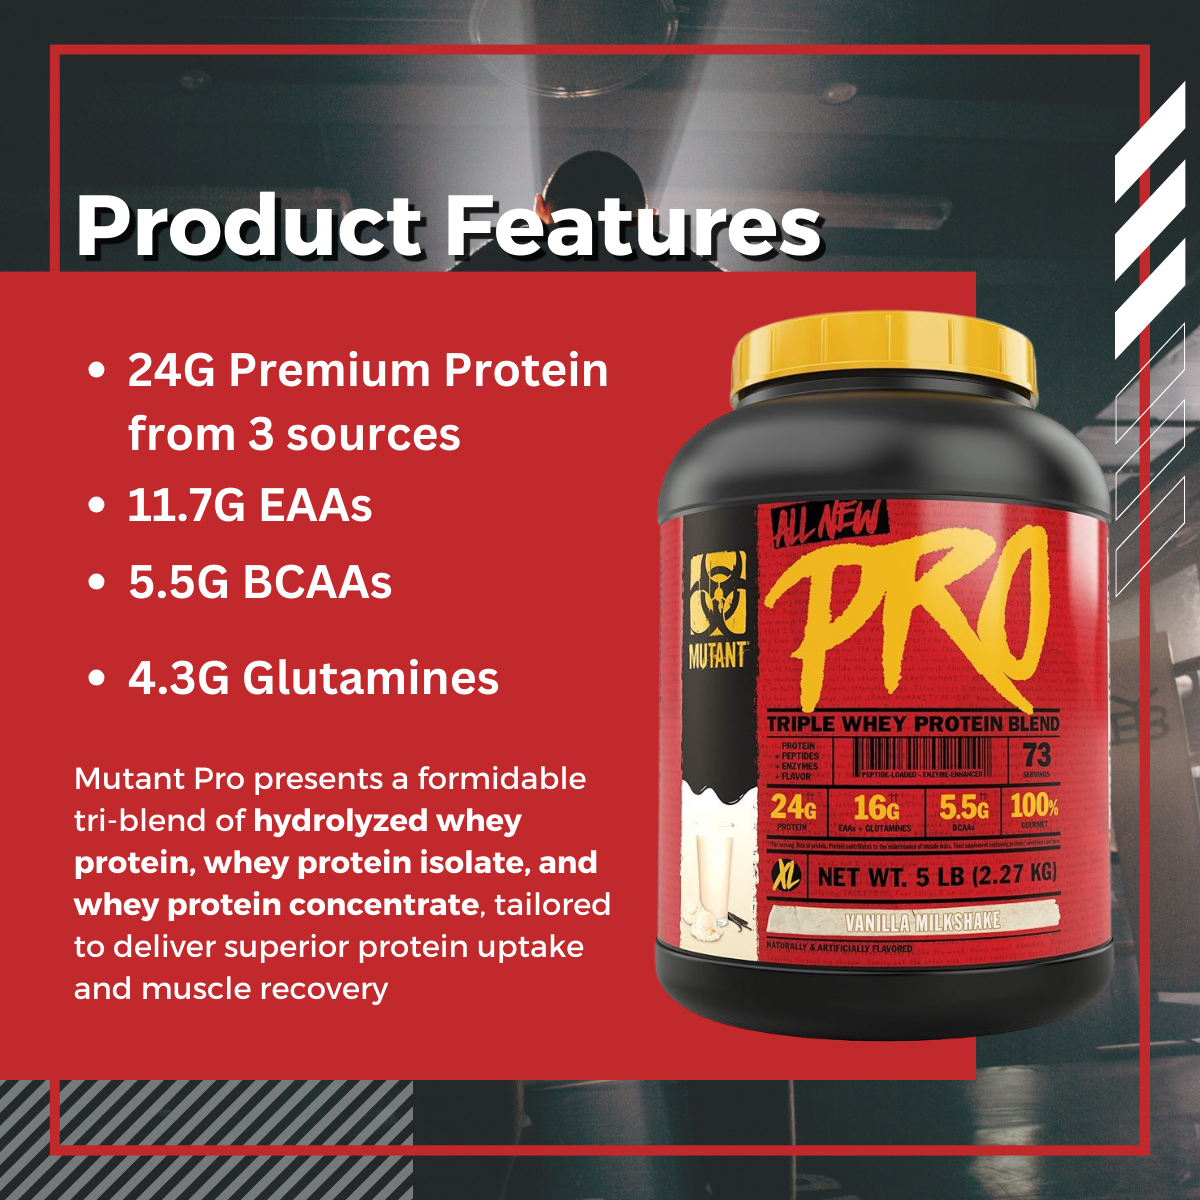 Mutant Pro, Triple Whey Protein Powder, Support Building Muscle, Various Flavors, 5 Lbs, Product Features